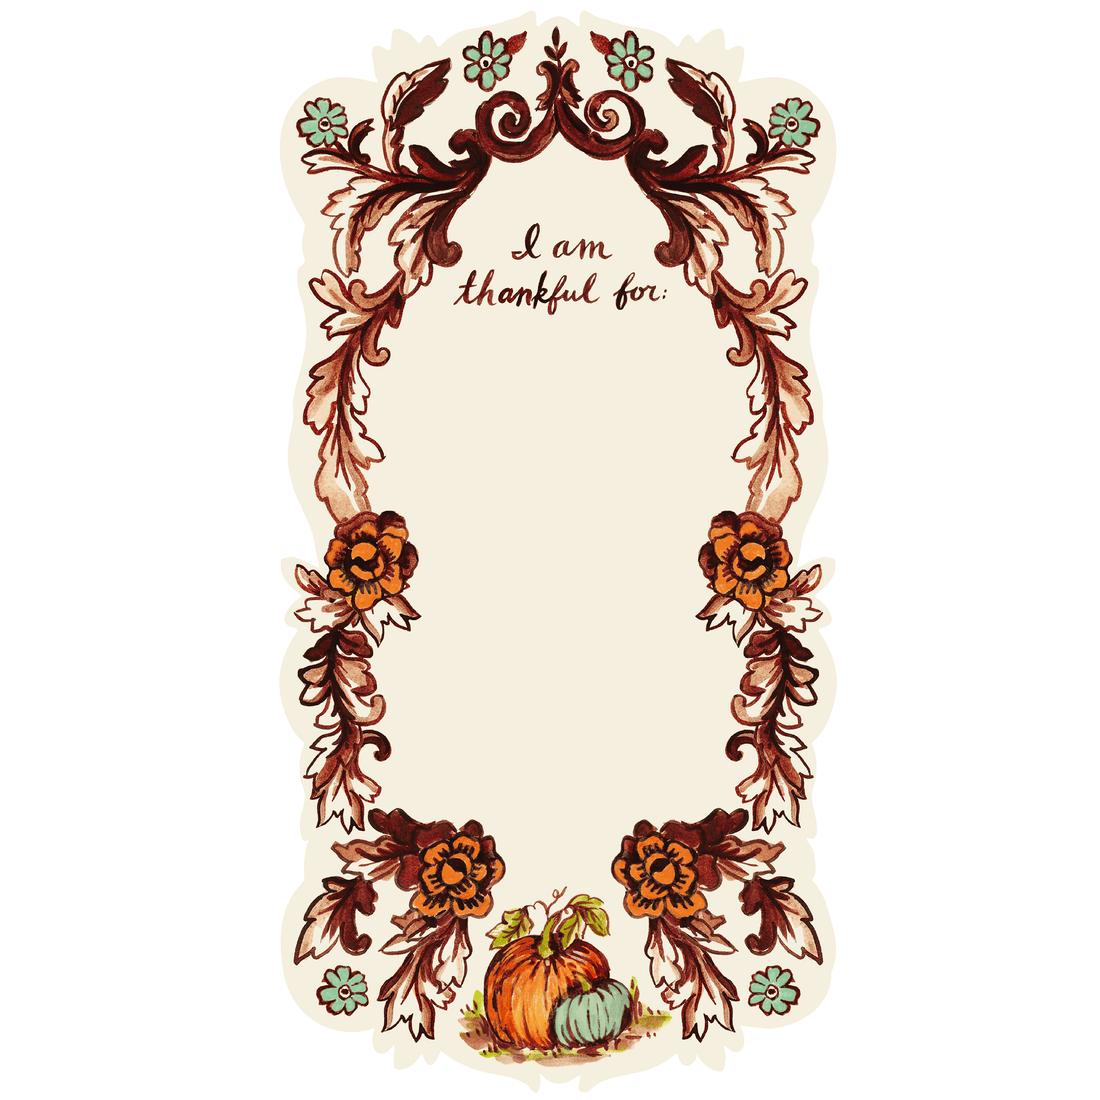 A white, die-cut rectangular paper accent with a frame of fall foliage and pumpkins in brown, orange and seafoam surrounding a blank area titled &quot;I am thankful for:&quot; in a handwritten script. 